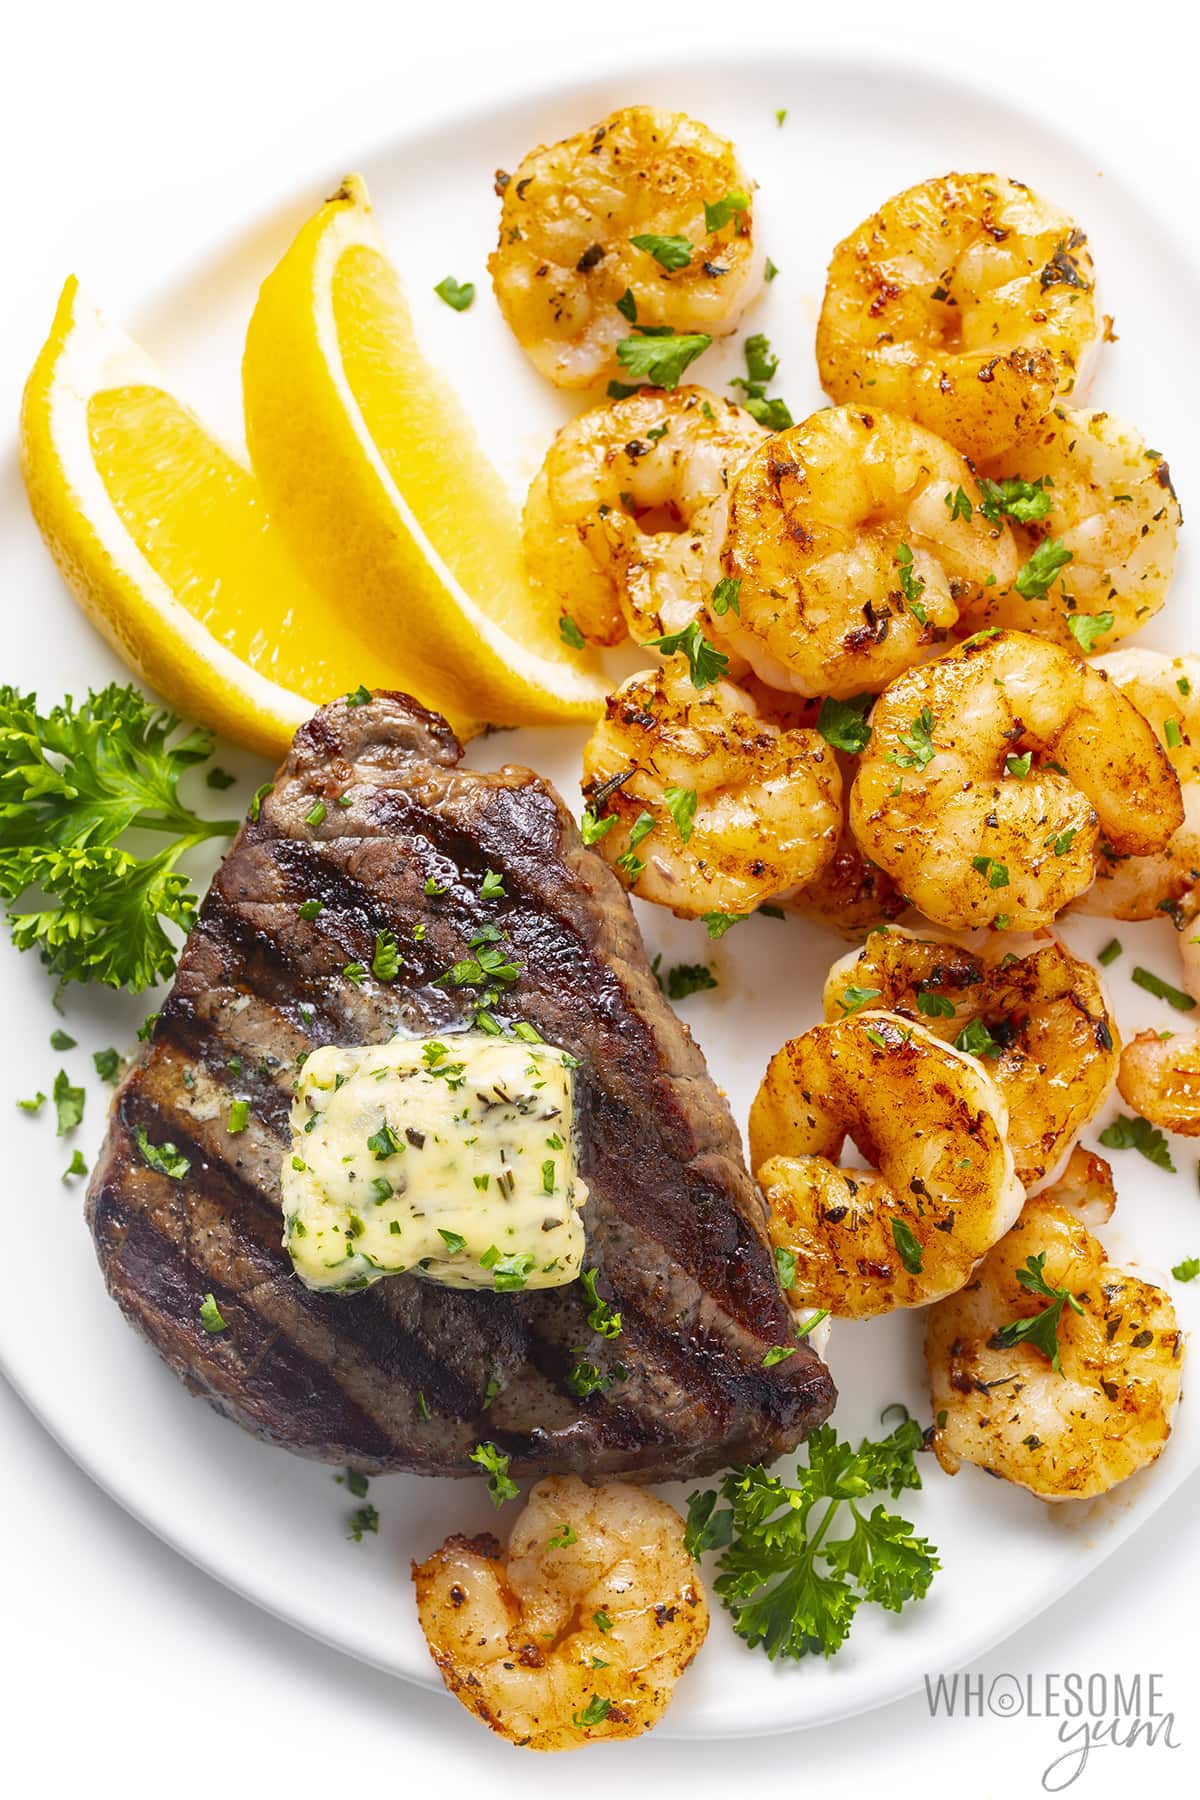 Steak and shrimp on a plate with lemon wedges.